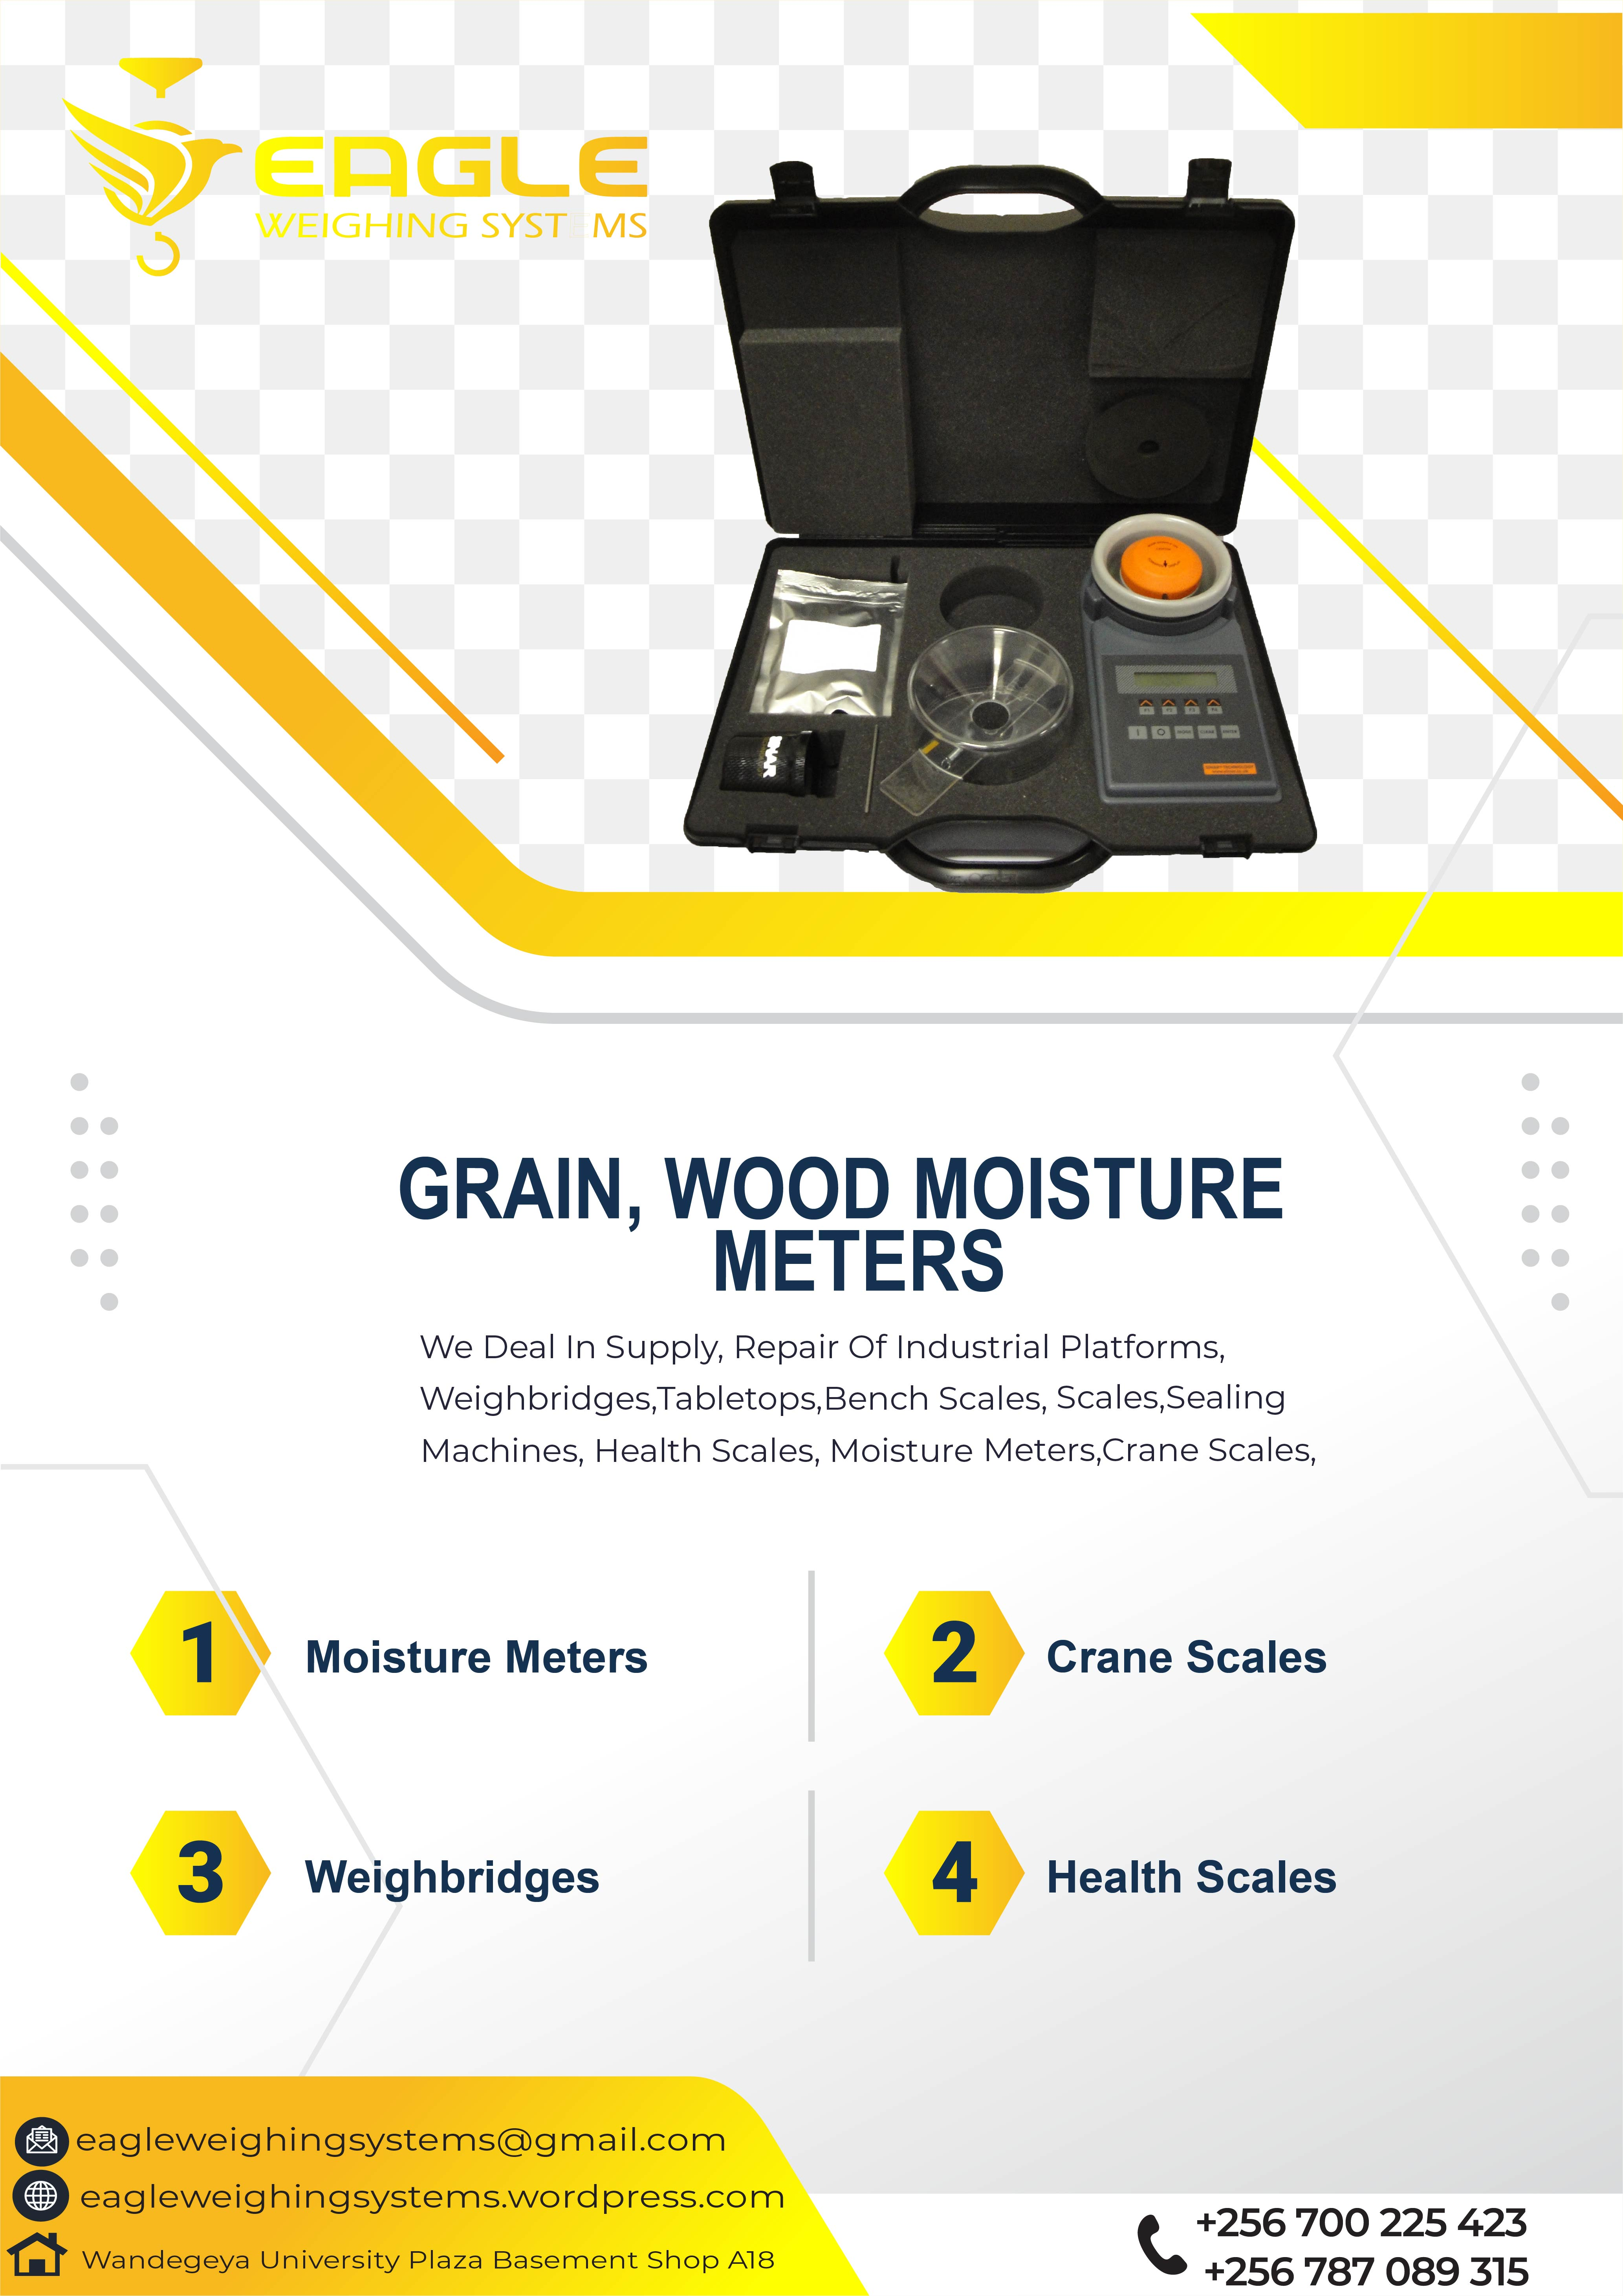 Portable Grain Moisture Meters for maize, coffee, beans in K'